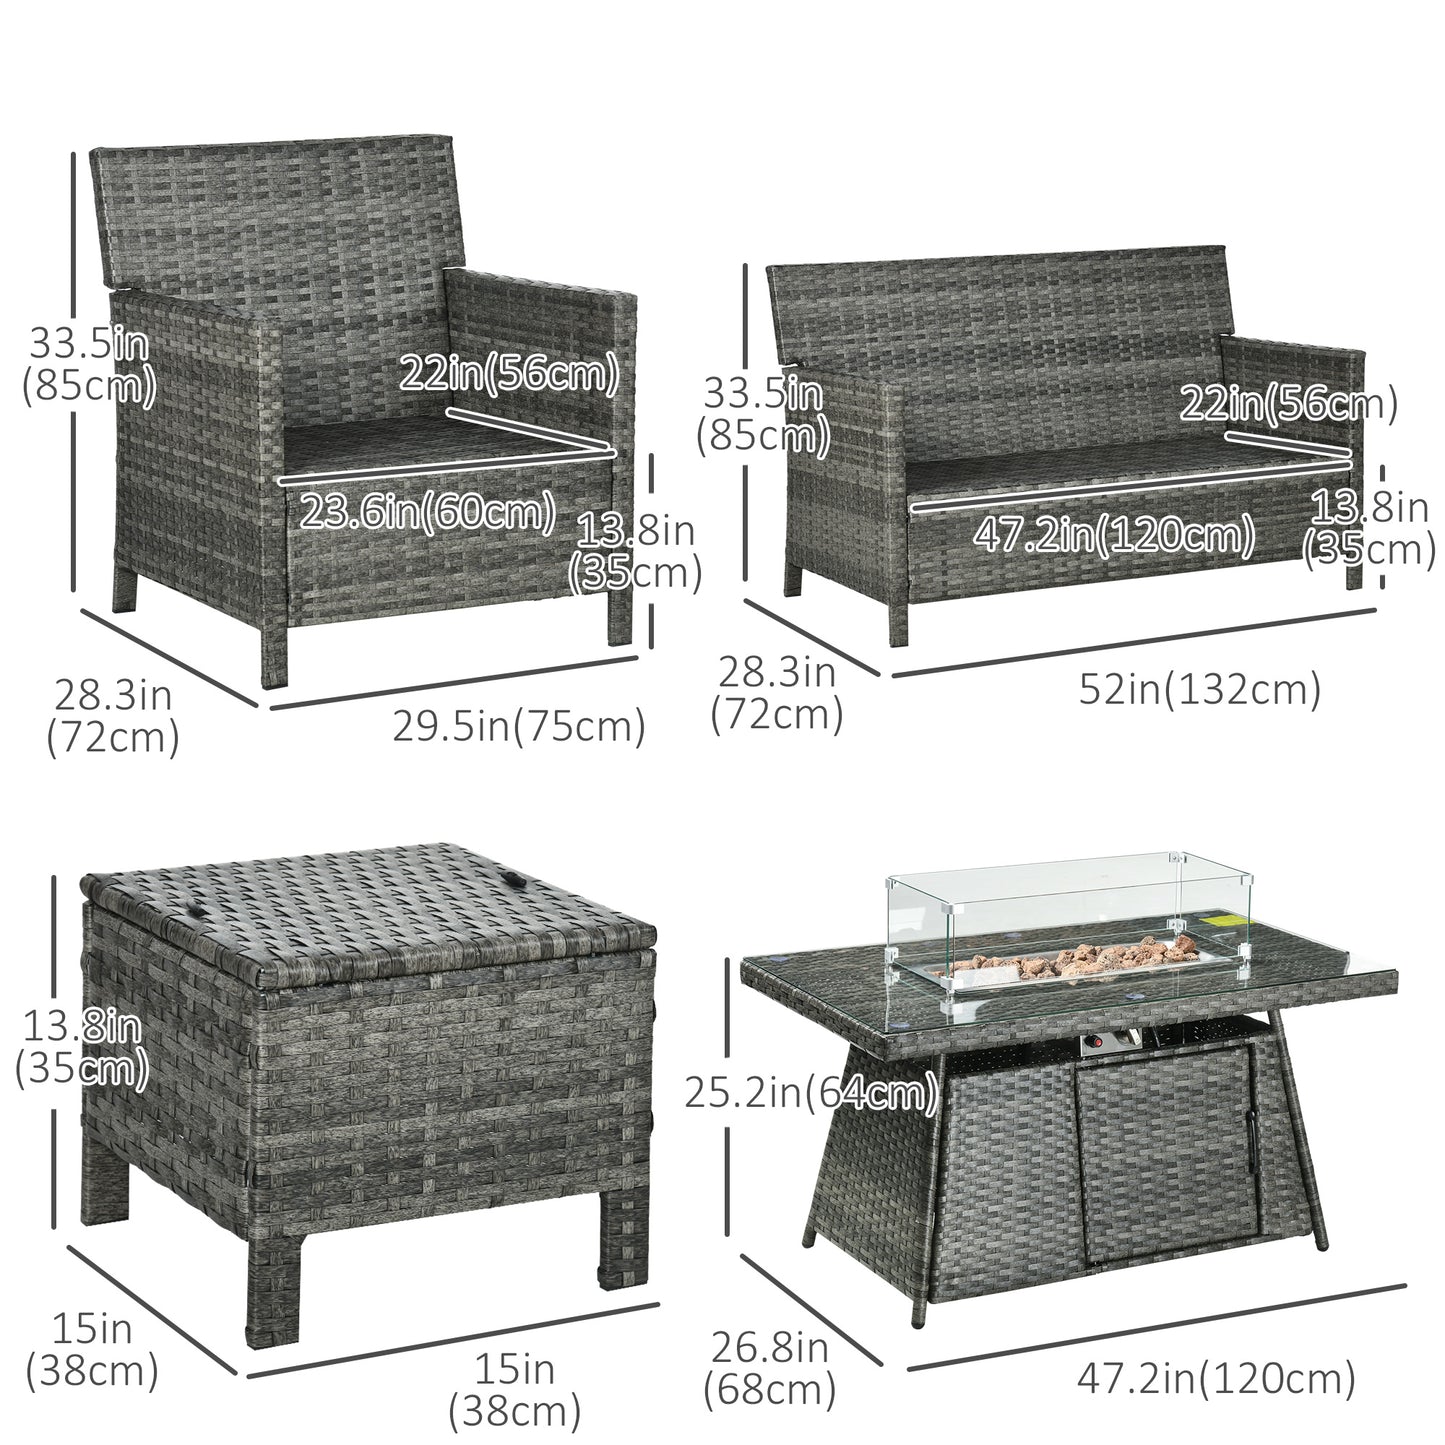 50,000 BTU Gas Fire Pit Patio Set, PE Rattan Sofa & Dining Table, Grey Patio Furniture Sets   at Gallery Canada